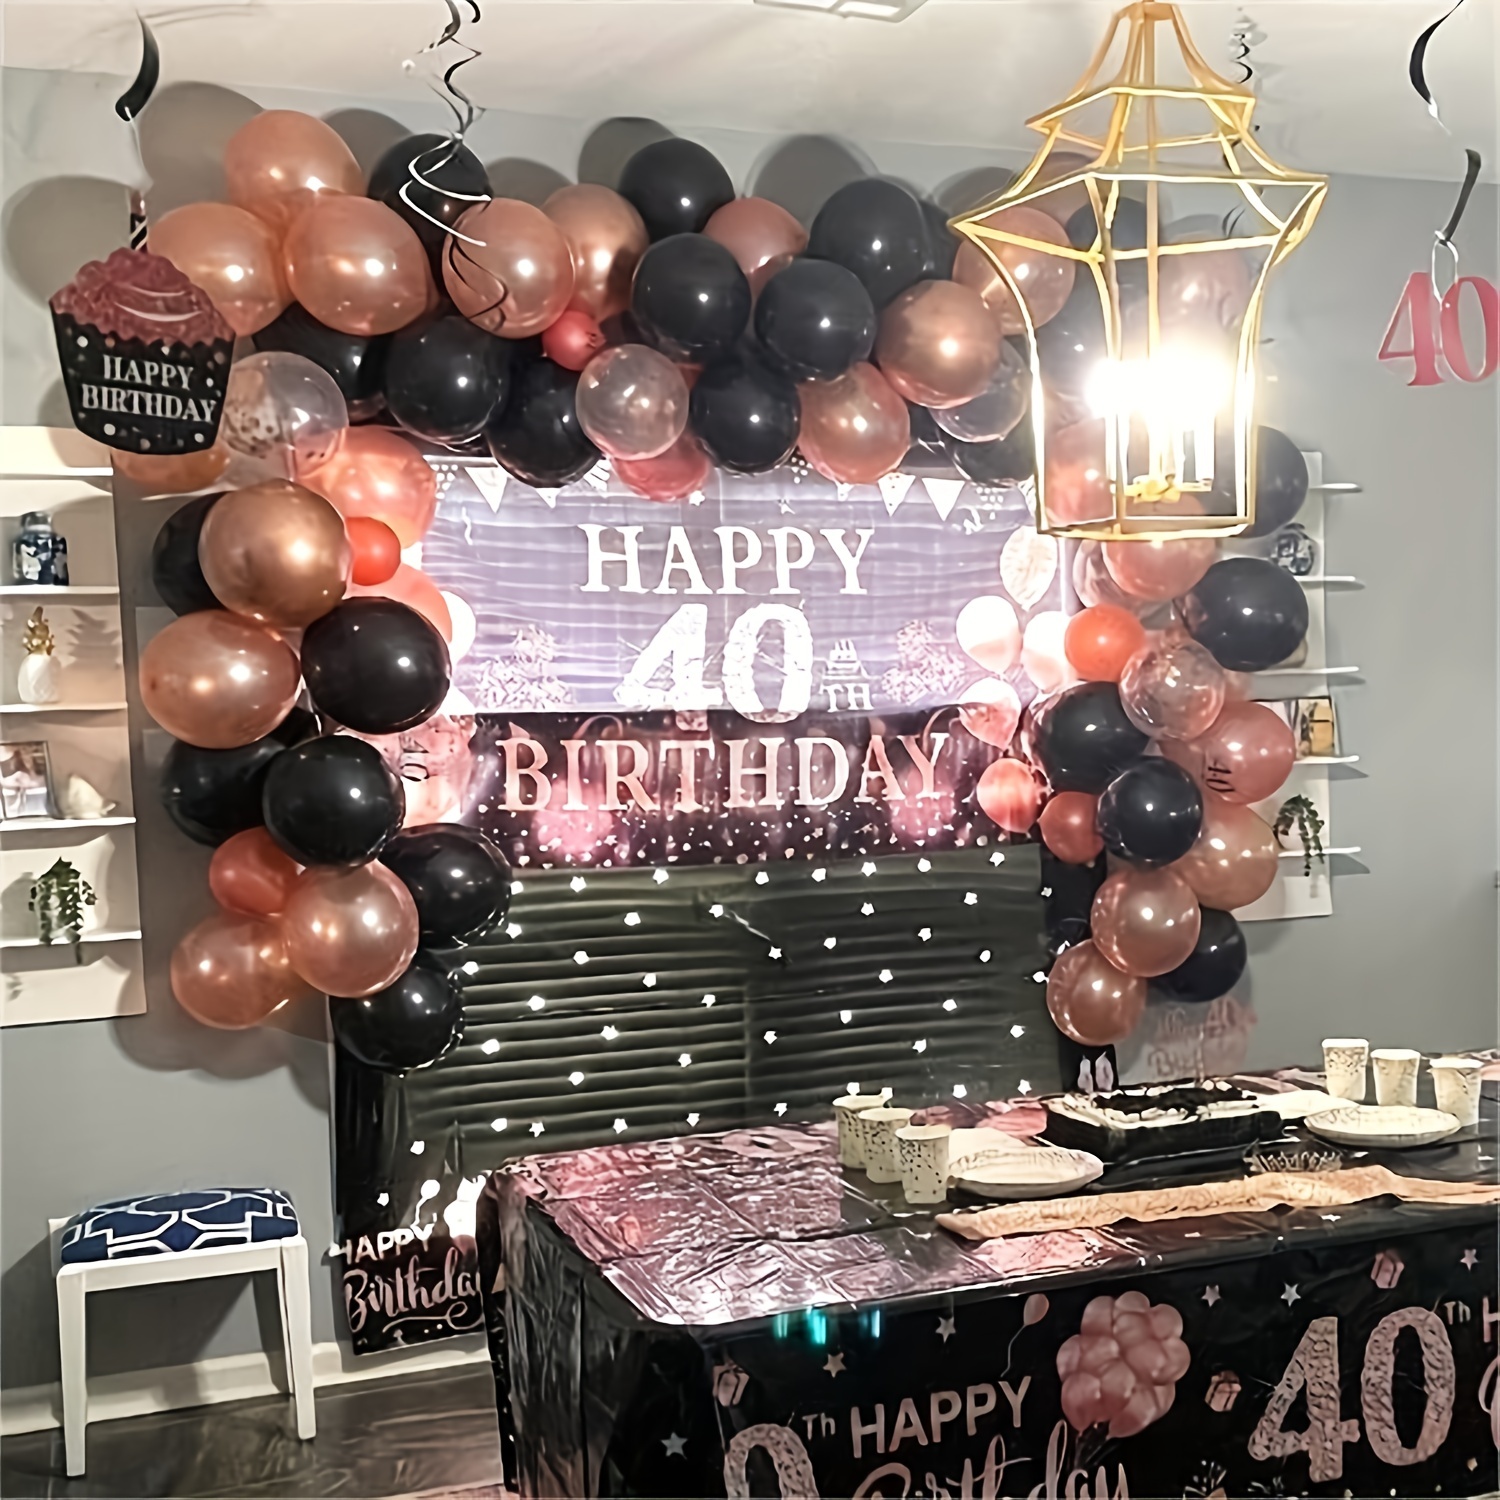 Rose Gold & Black Party  Rose gold party decor, Black party decorations,  18th birthday decorations